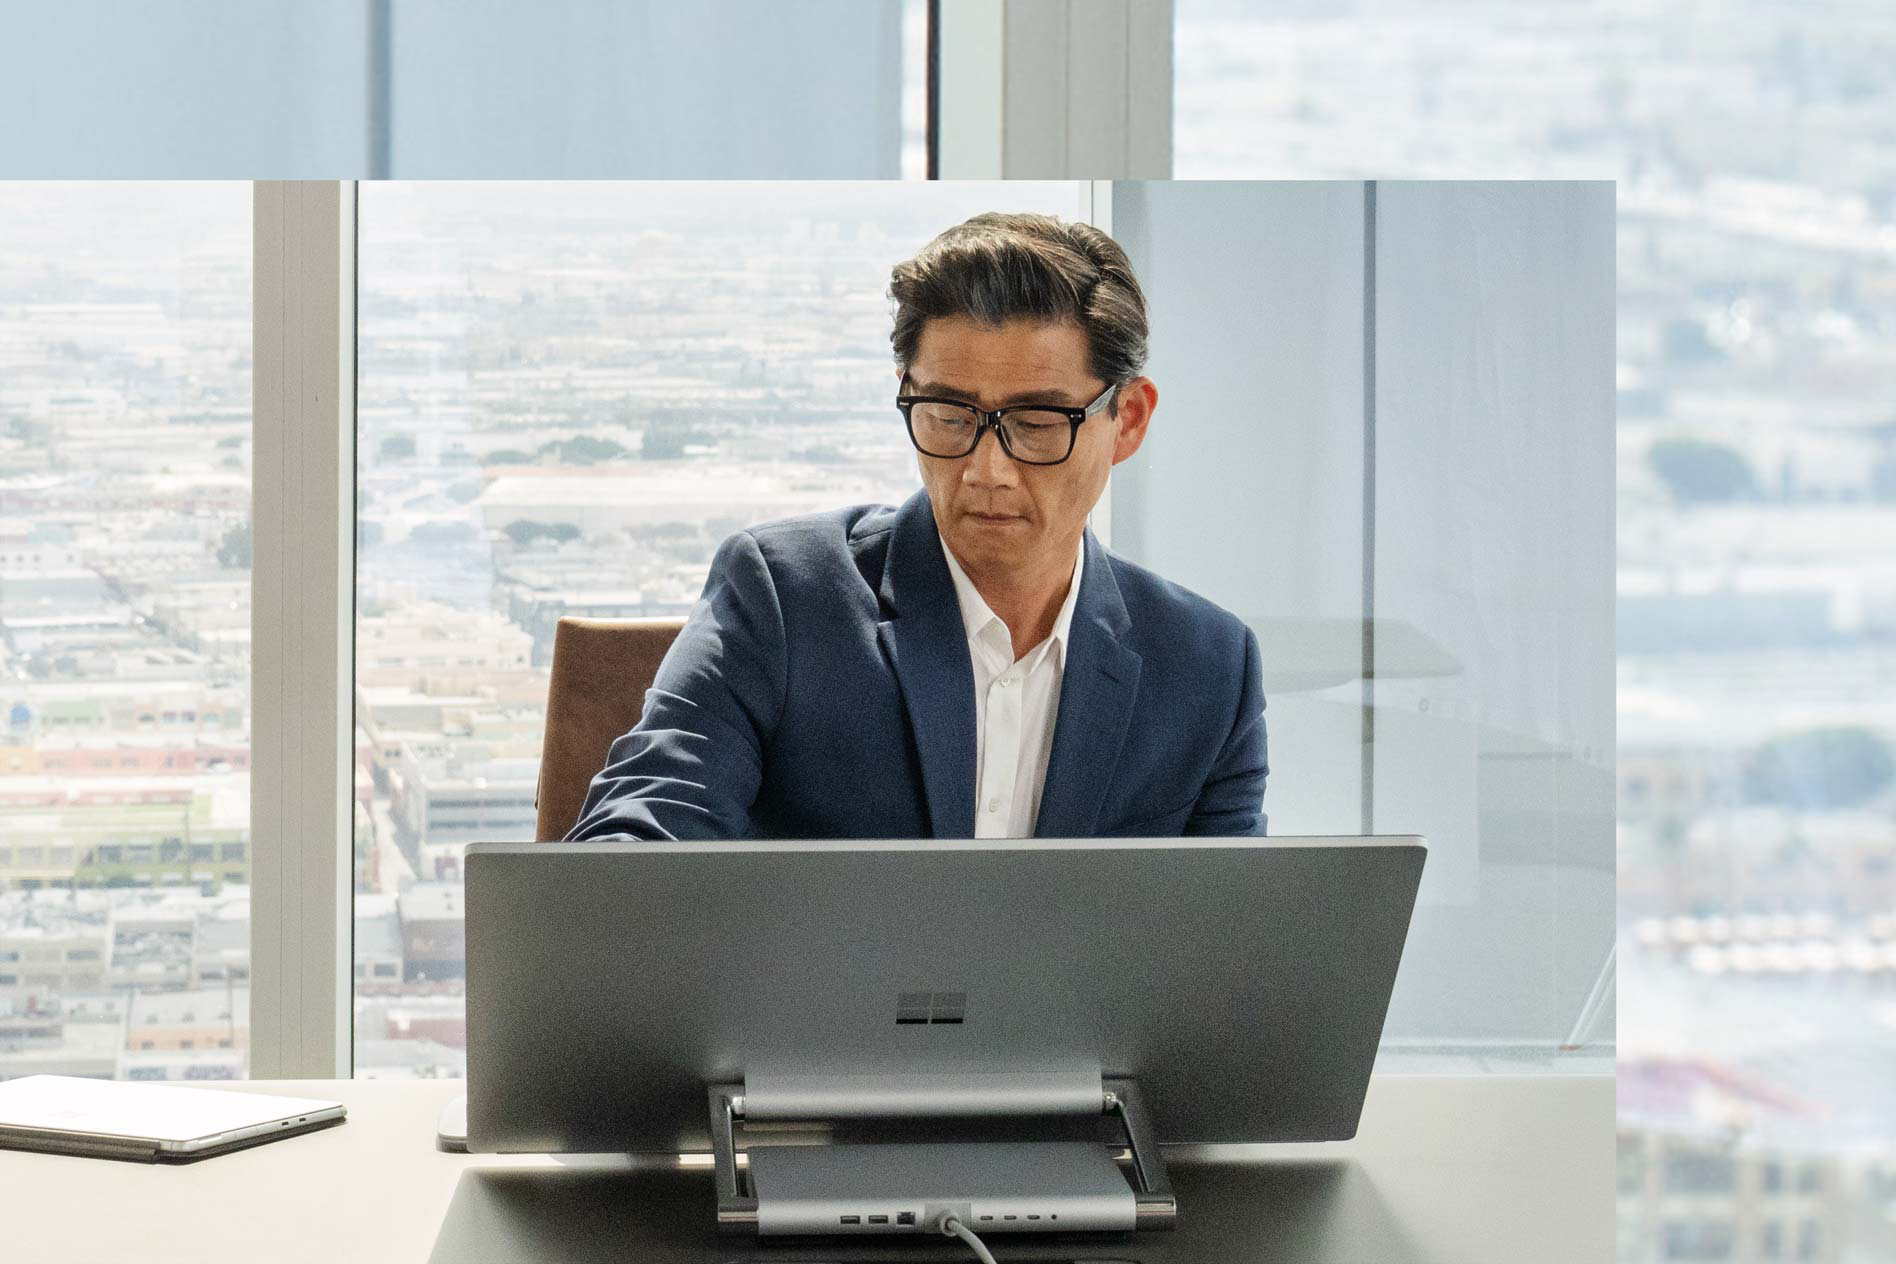 A man seated in front of his Surface Studio 2+ in front of a window showing a few of the city.